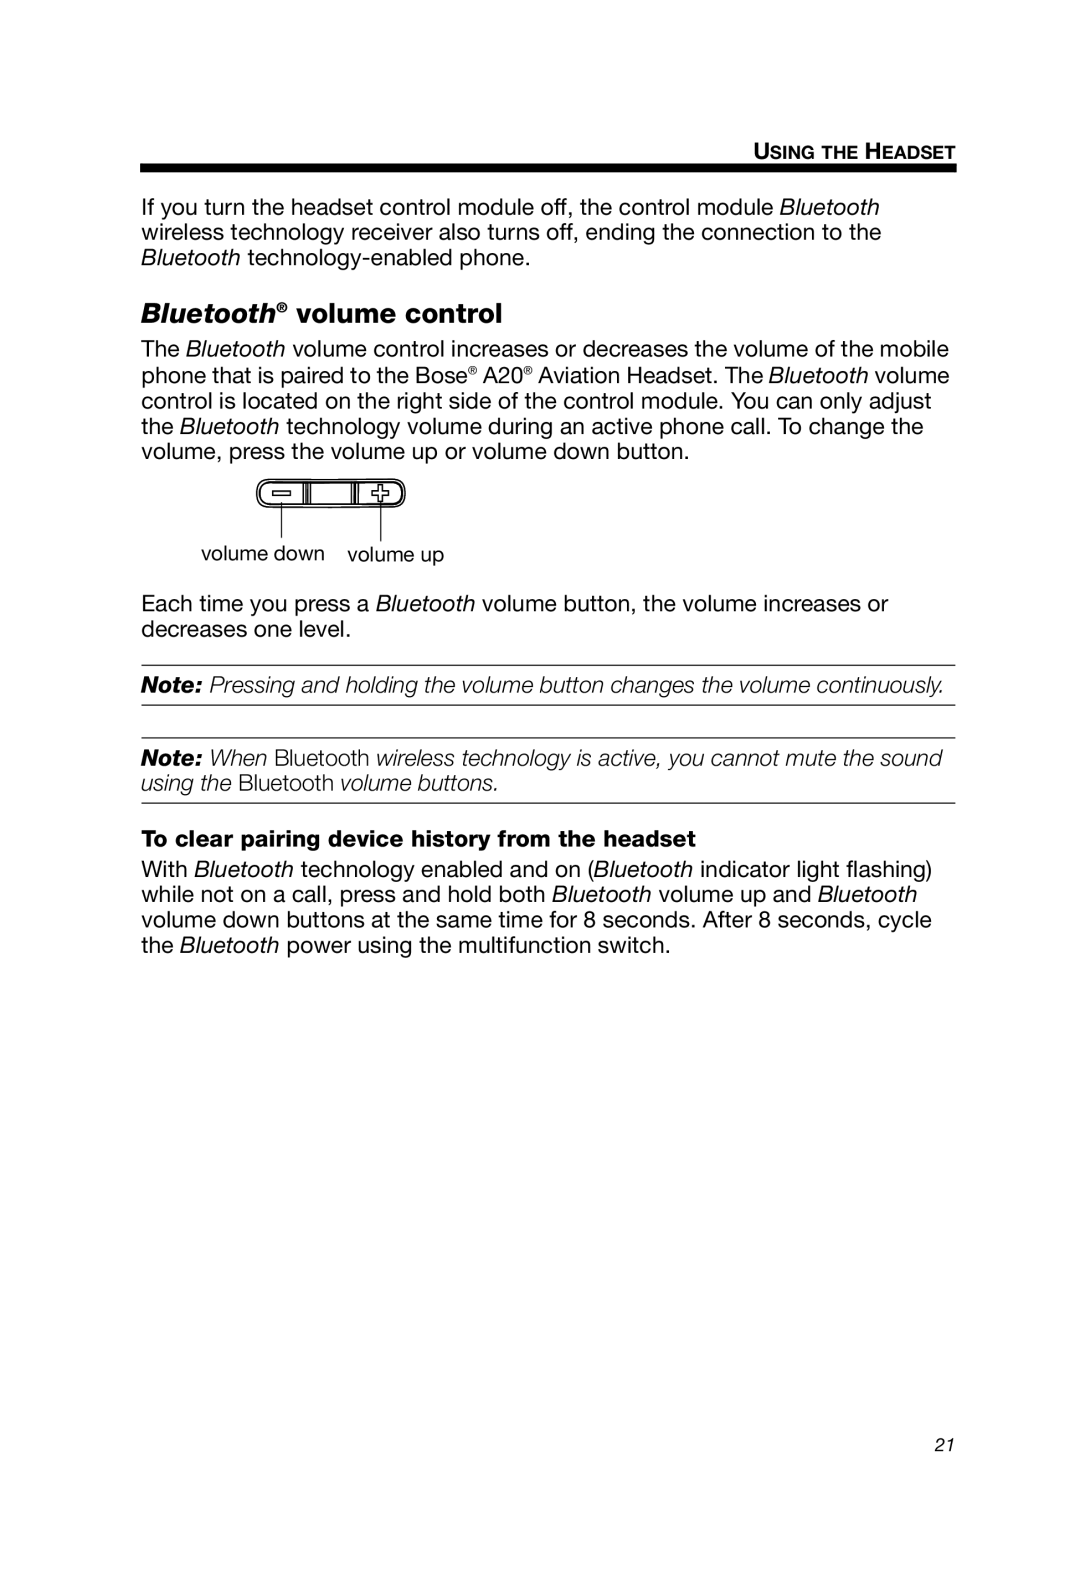 Bose A20 manual Bluetooth volume control, To clear pairing device history from the headset 